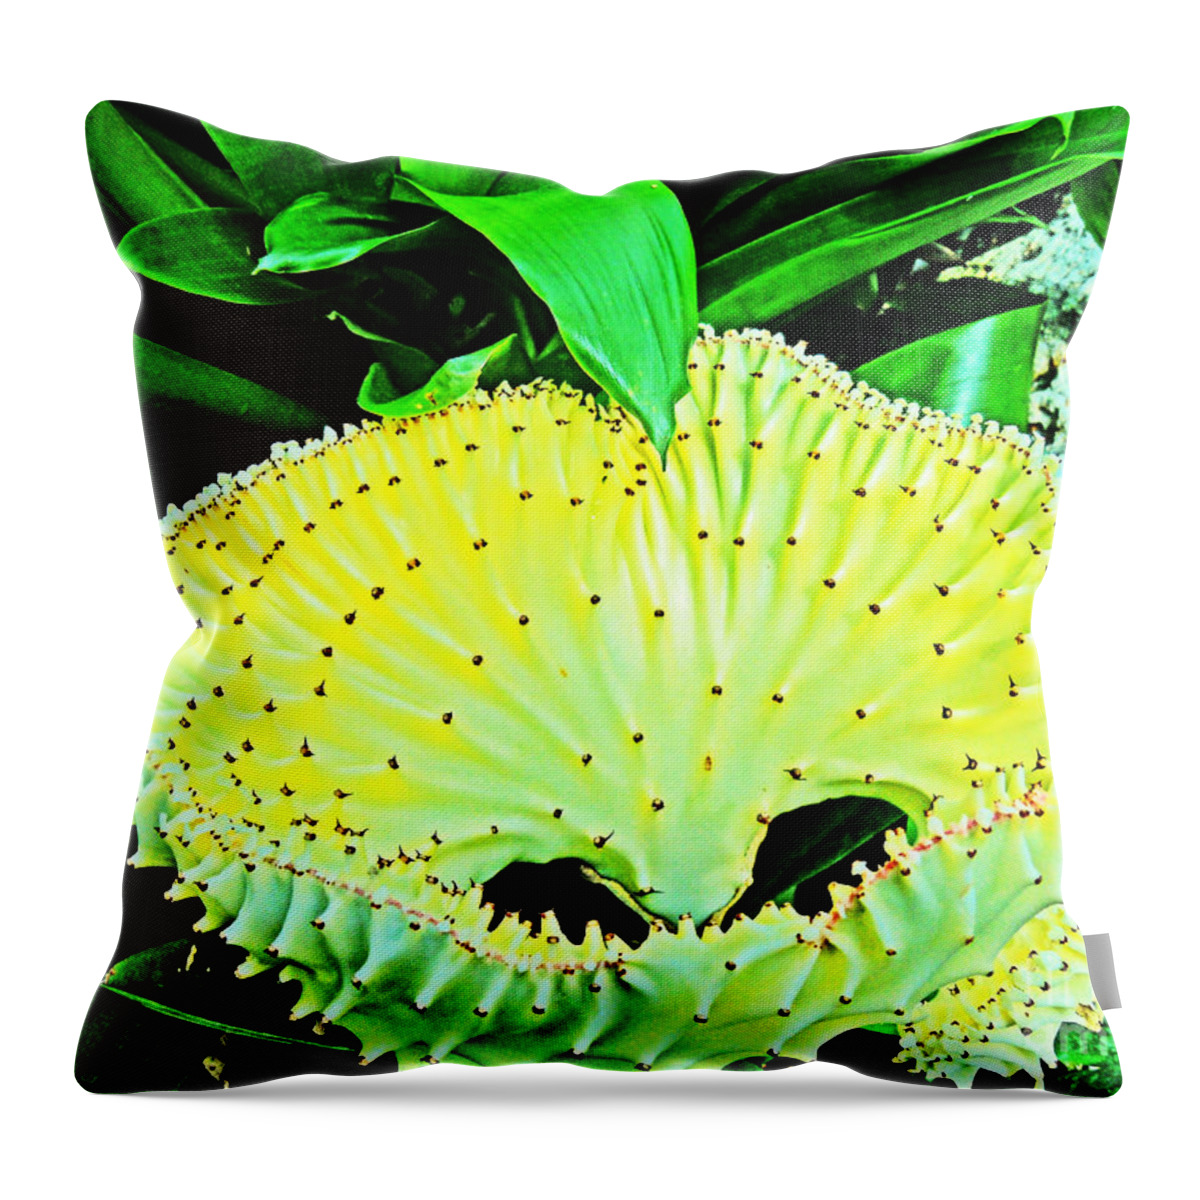  Throw Pillow featuring the photograph Shark Mouth flower in yellows and greens by David Frederick